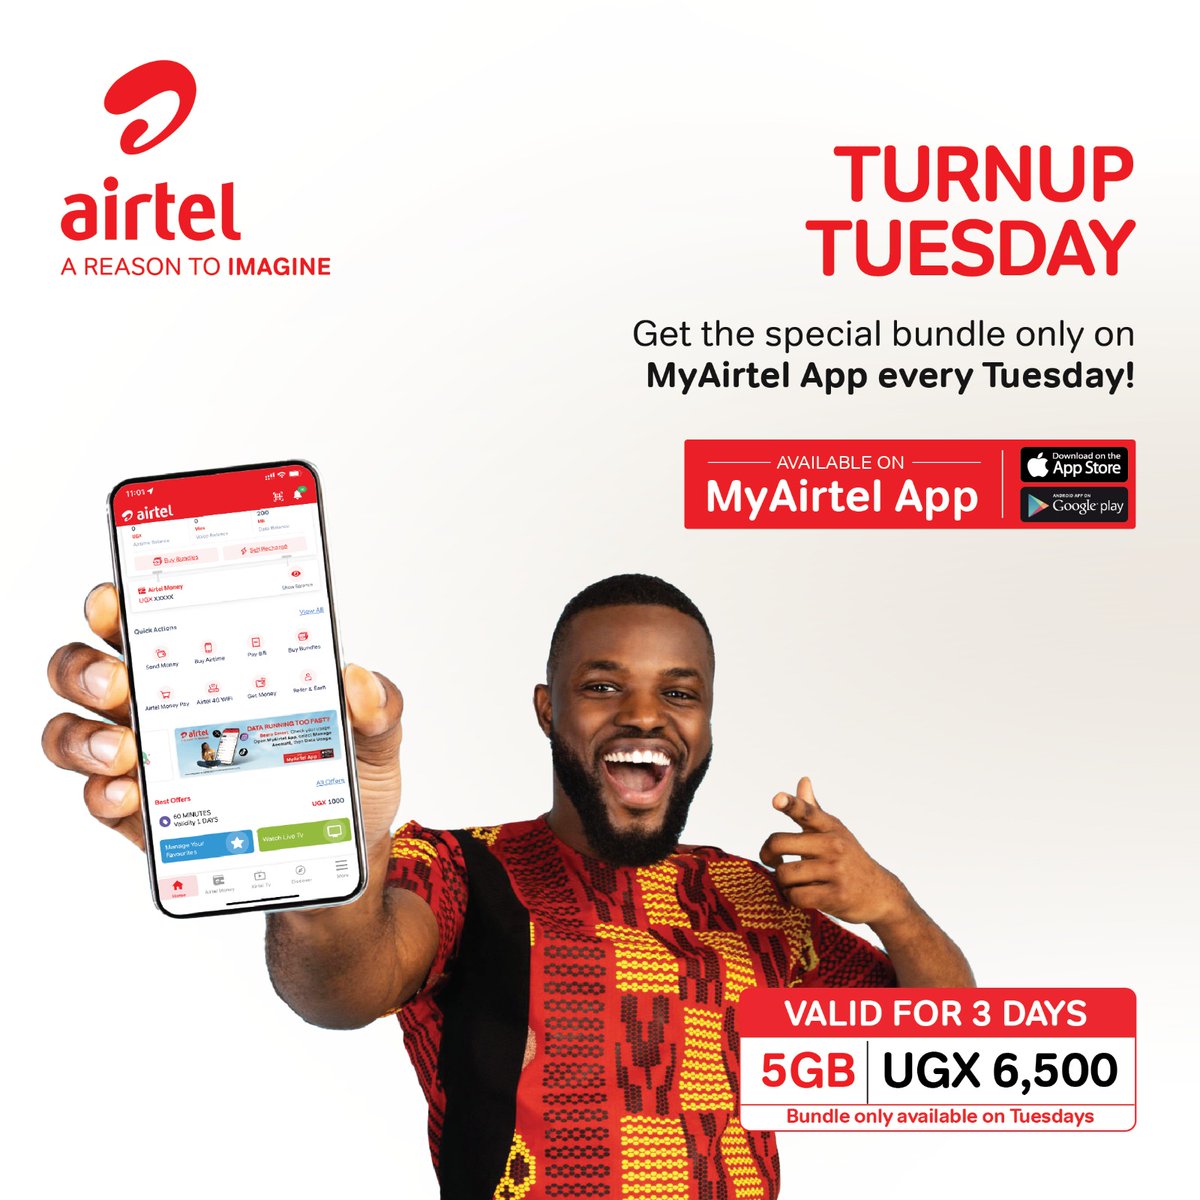 #TurnUpTuesday is here! Don't miss out on the incredible deals from the #MyAirtelApp. Get your package now and let the good times roll #TurnUpTuesday